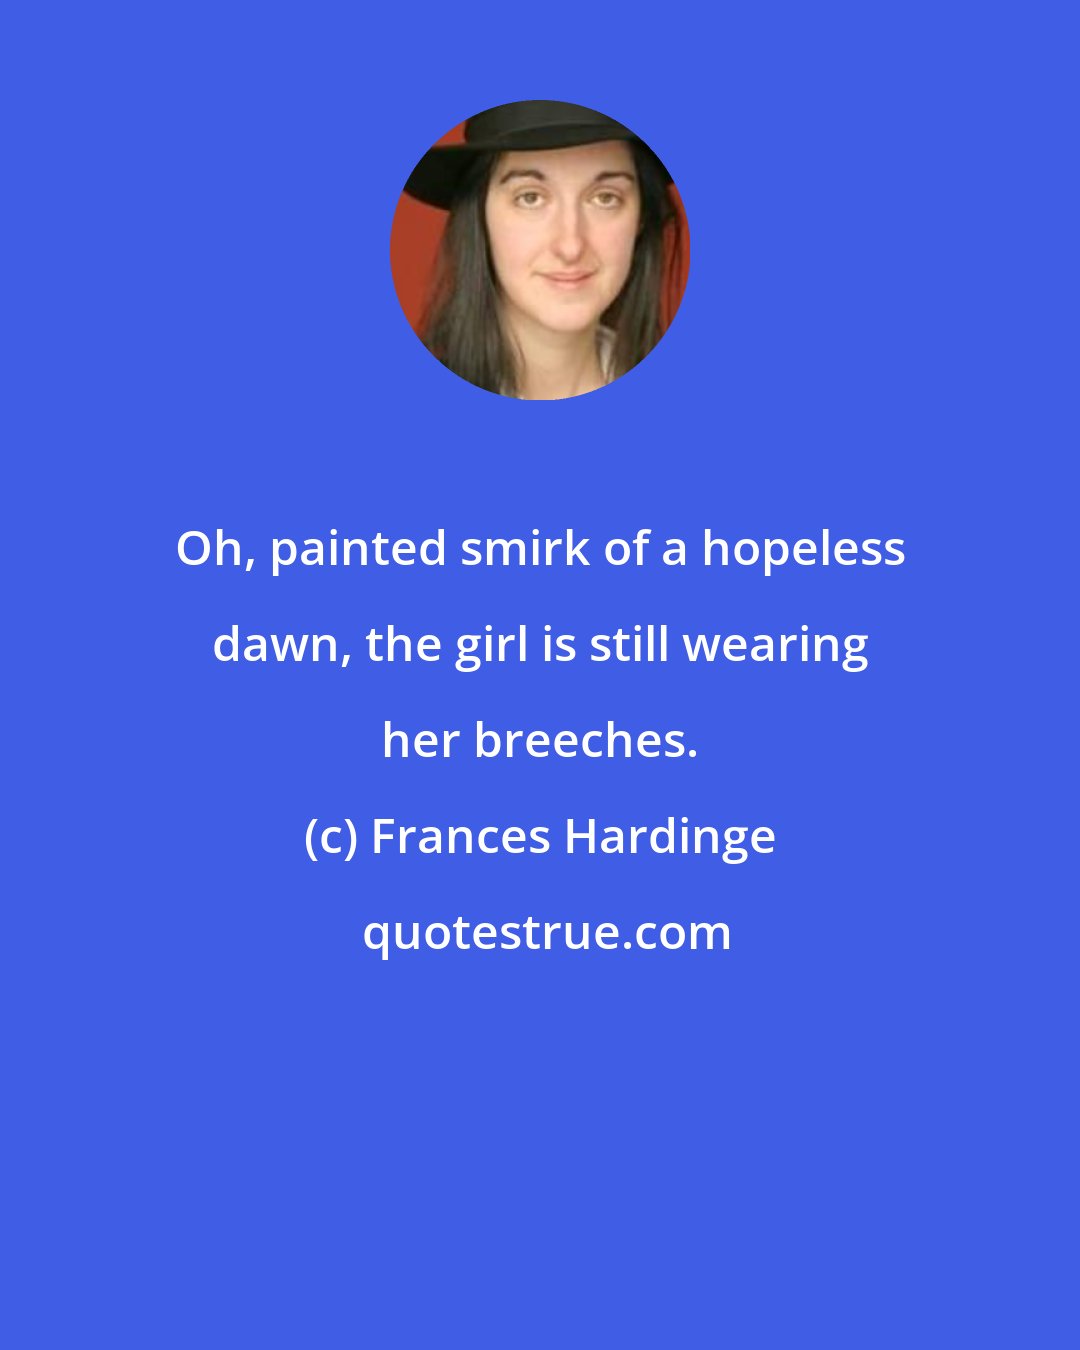 Frances Hardinge: Oh, painted smirk of a hopeless dawn, the girl is still wearing her breeches.